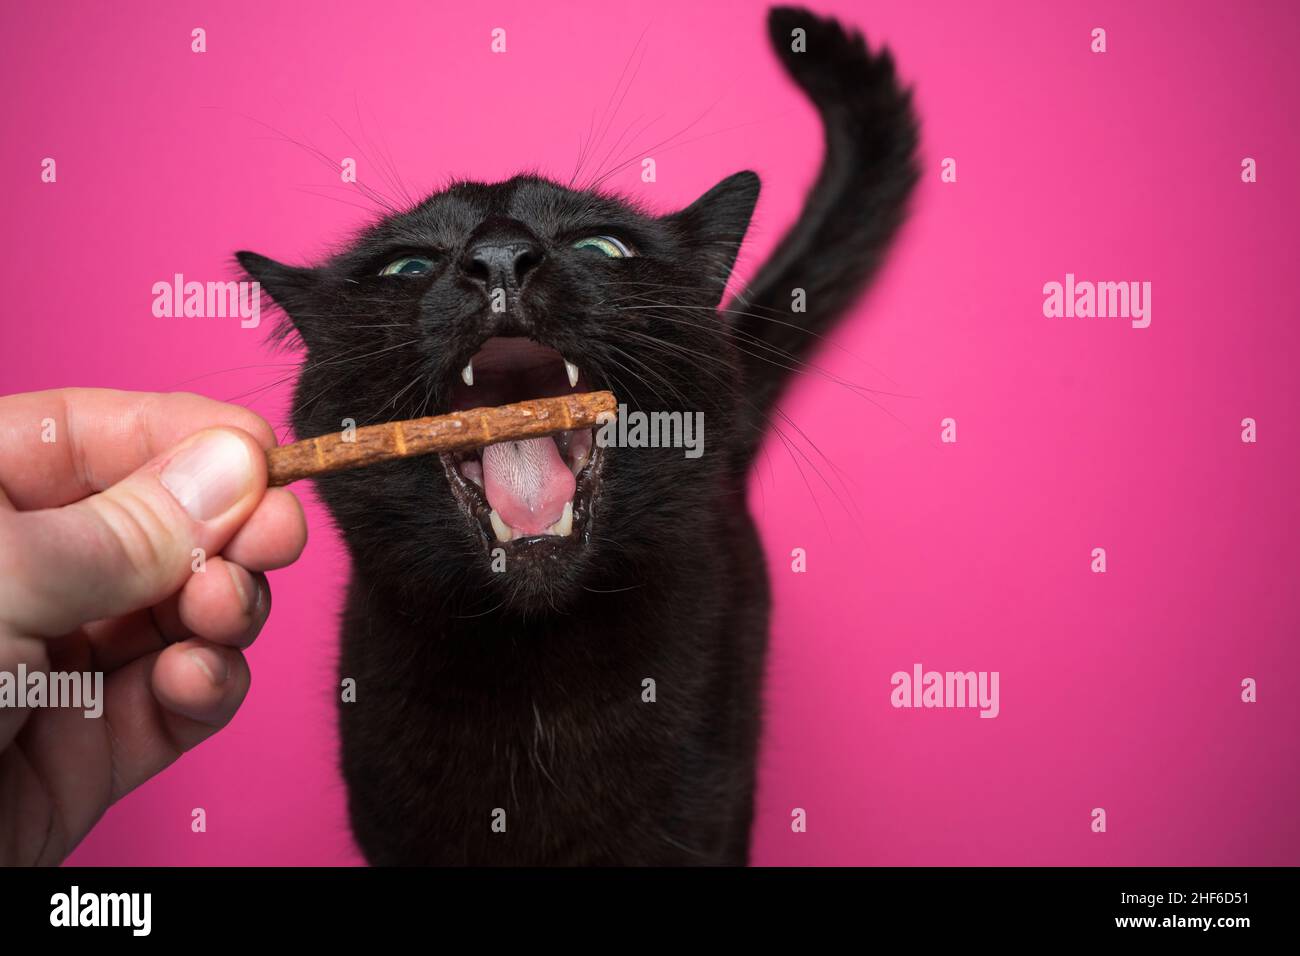 hand feeding hungry black cat treats with mouth wide open on pink background with copy space Stock Photo